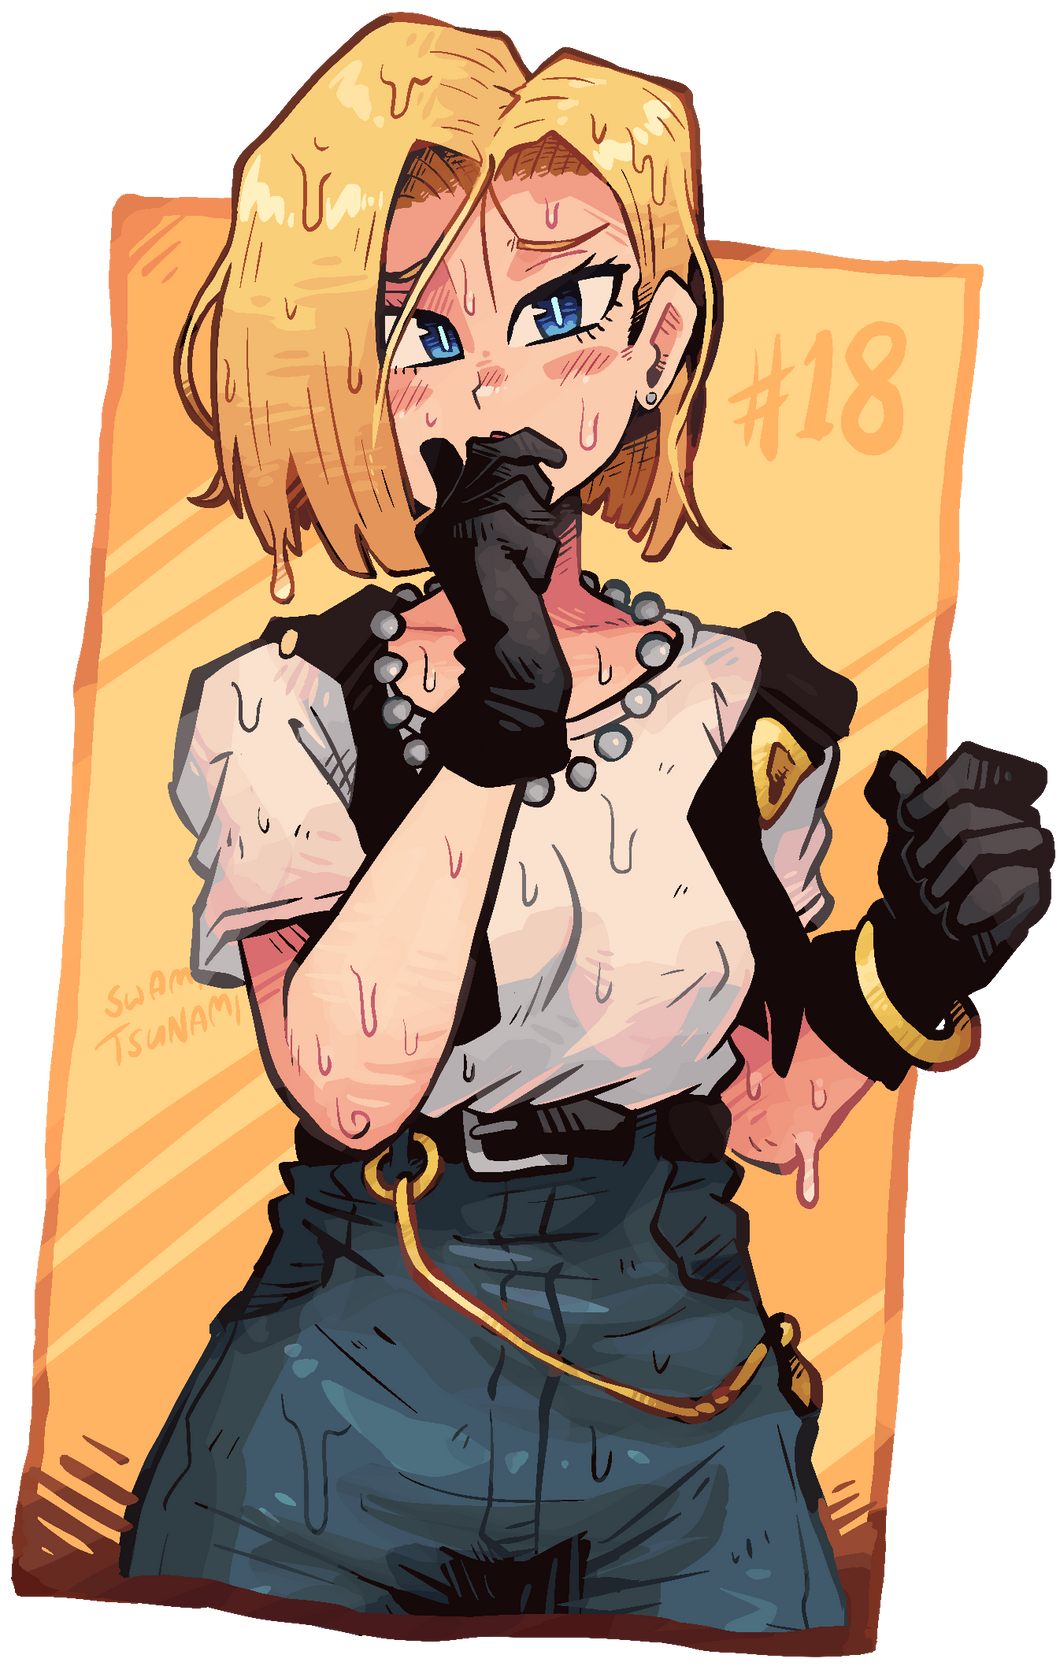 Android 18 Wet and Lewd (R18+) - 3.15-Inch Vinyl Stickers